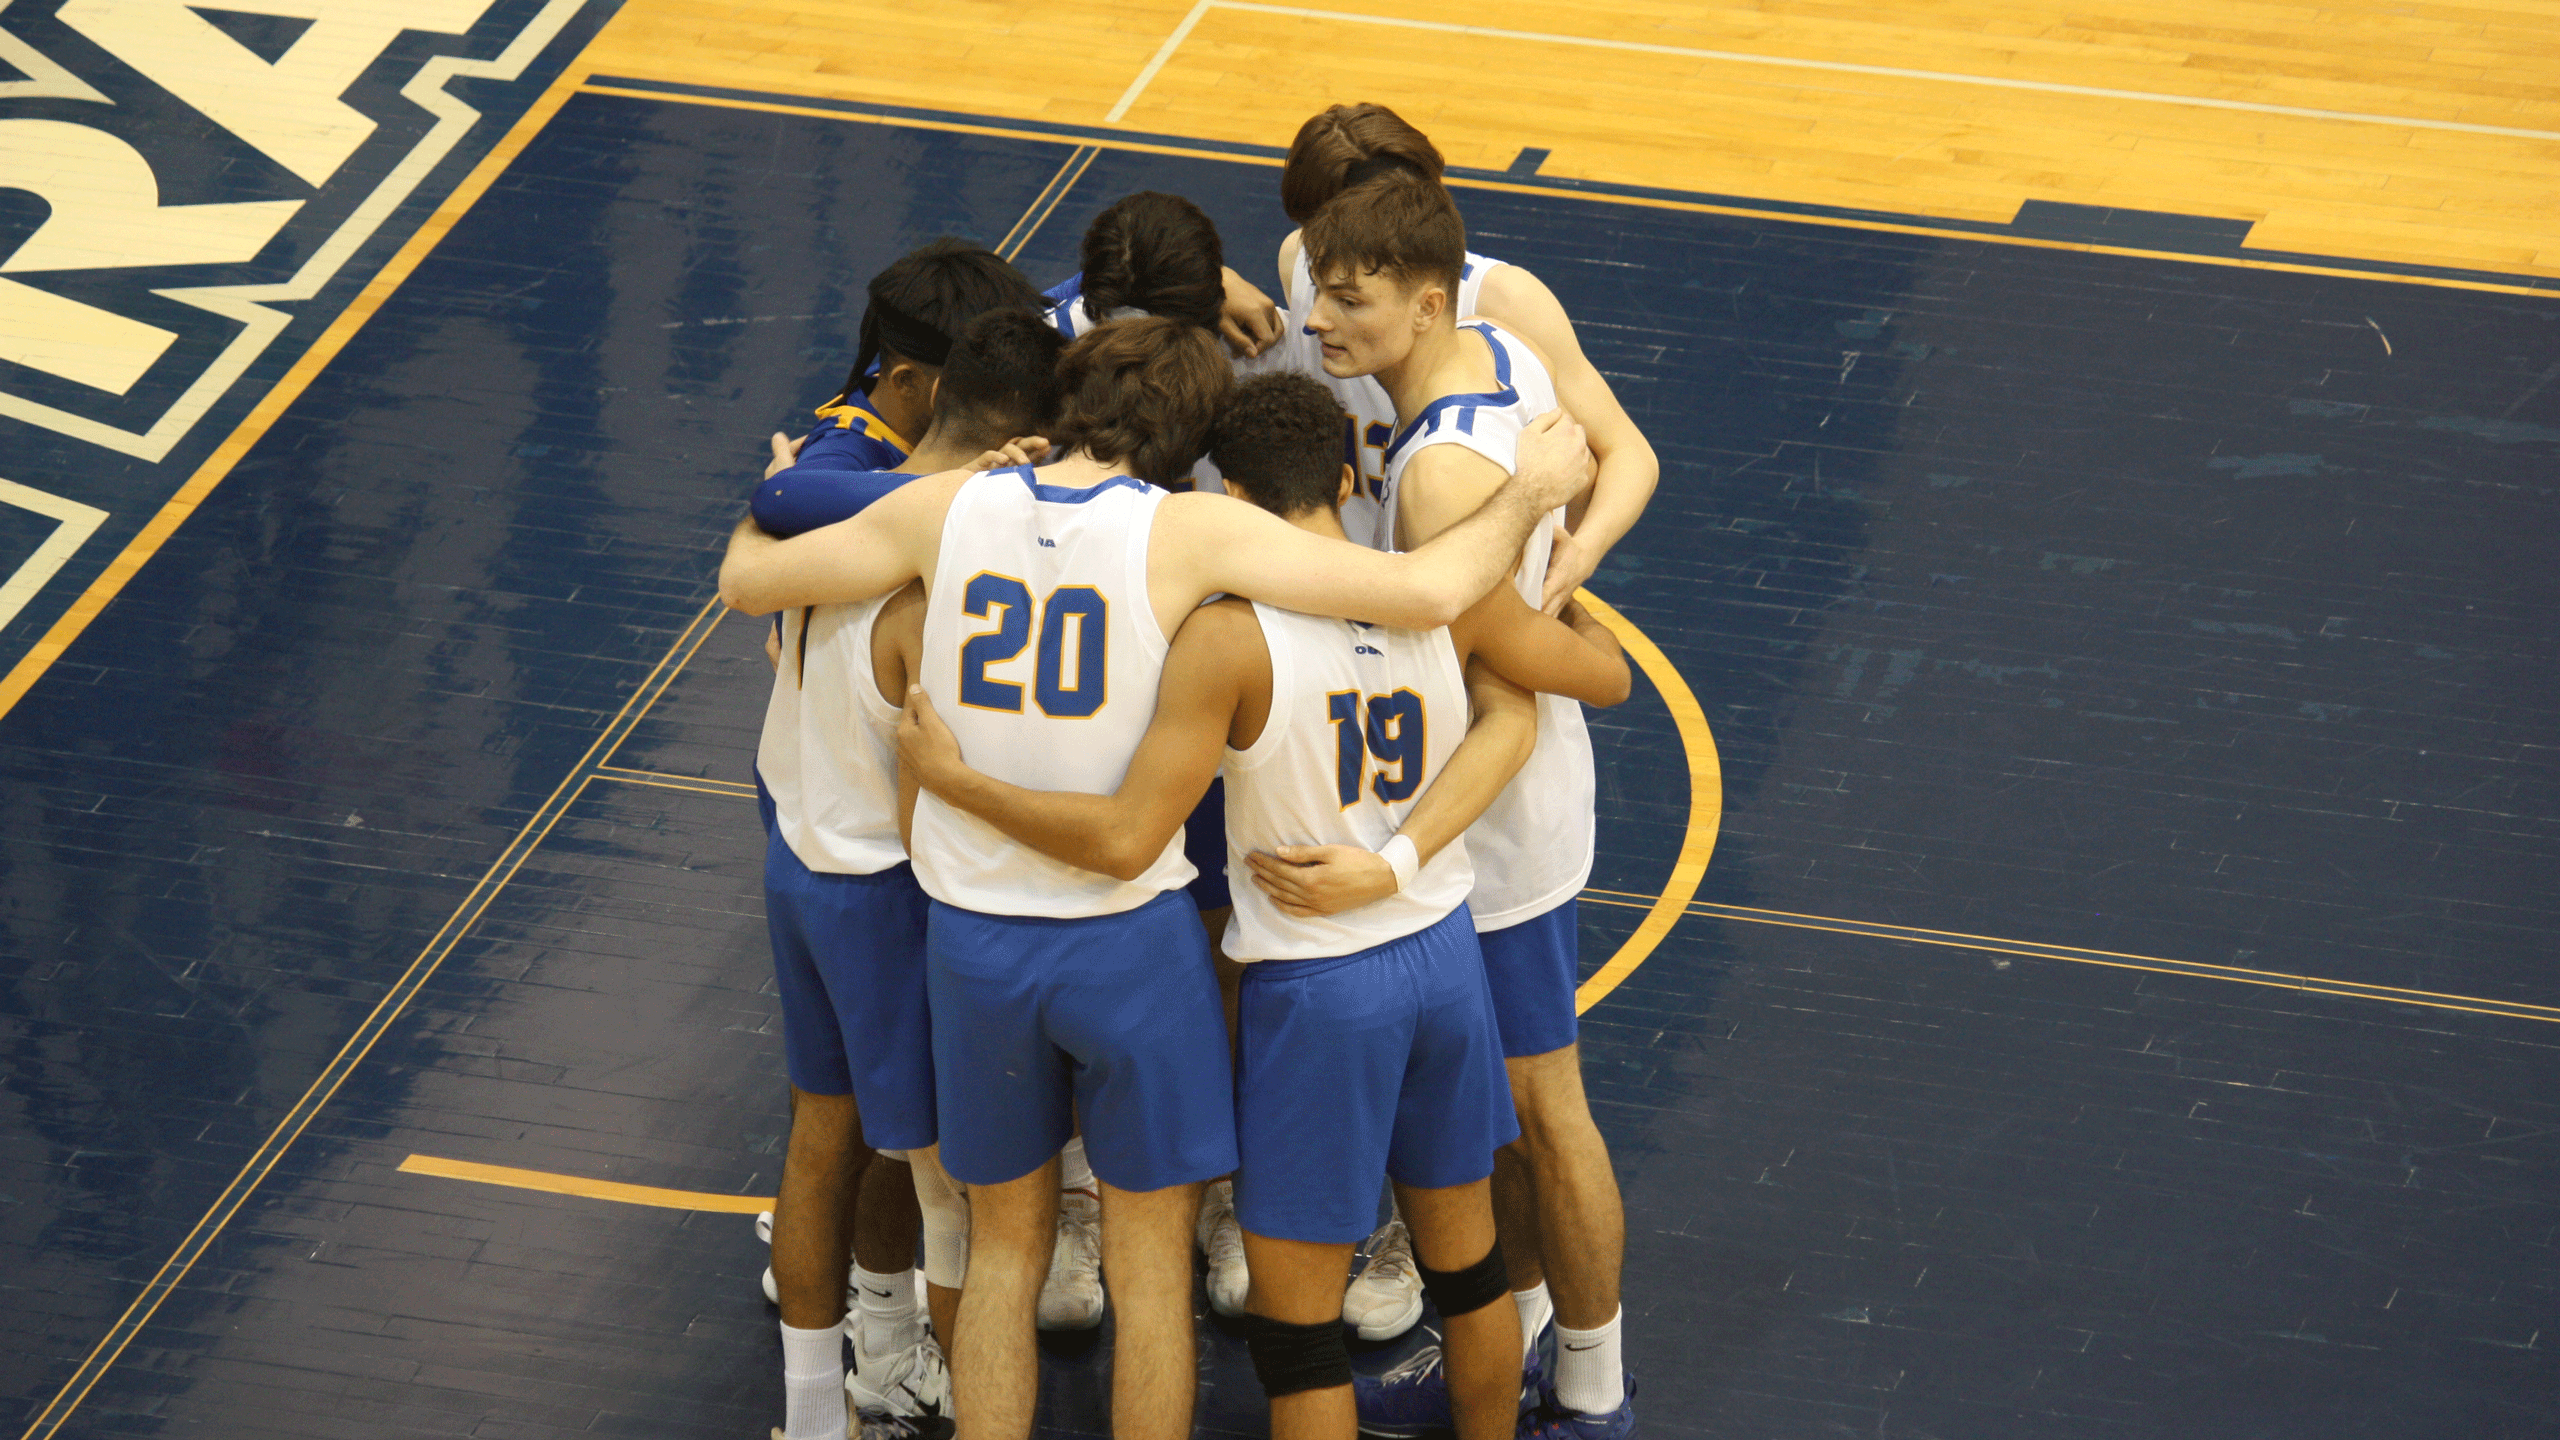 A group of volleyball players in white jerseys huddle